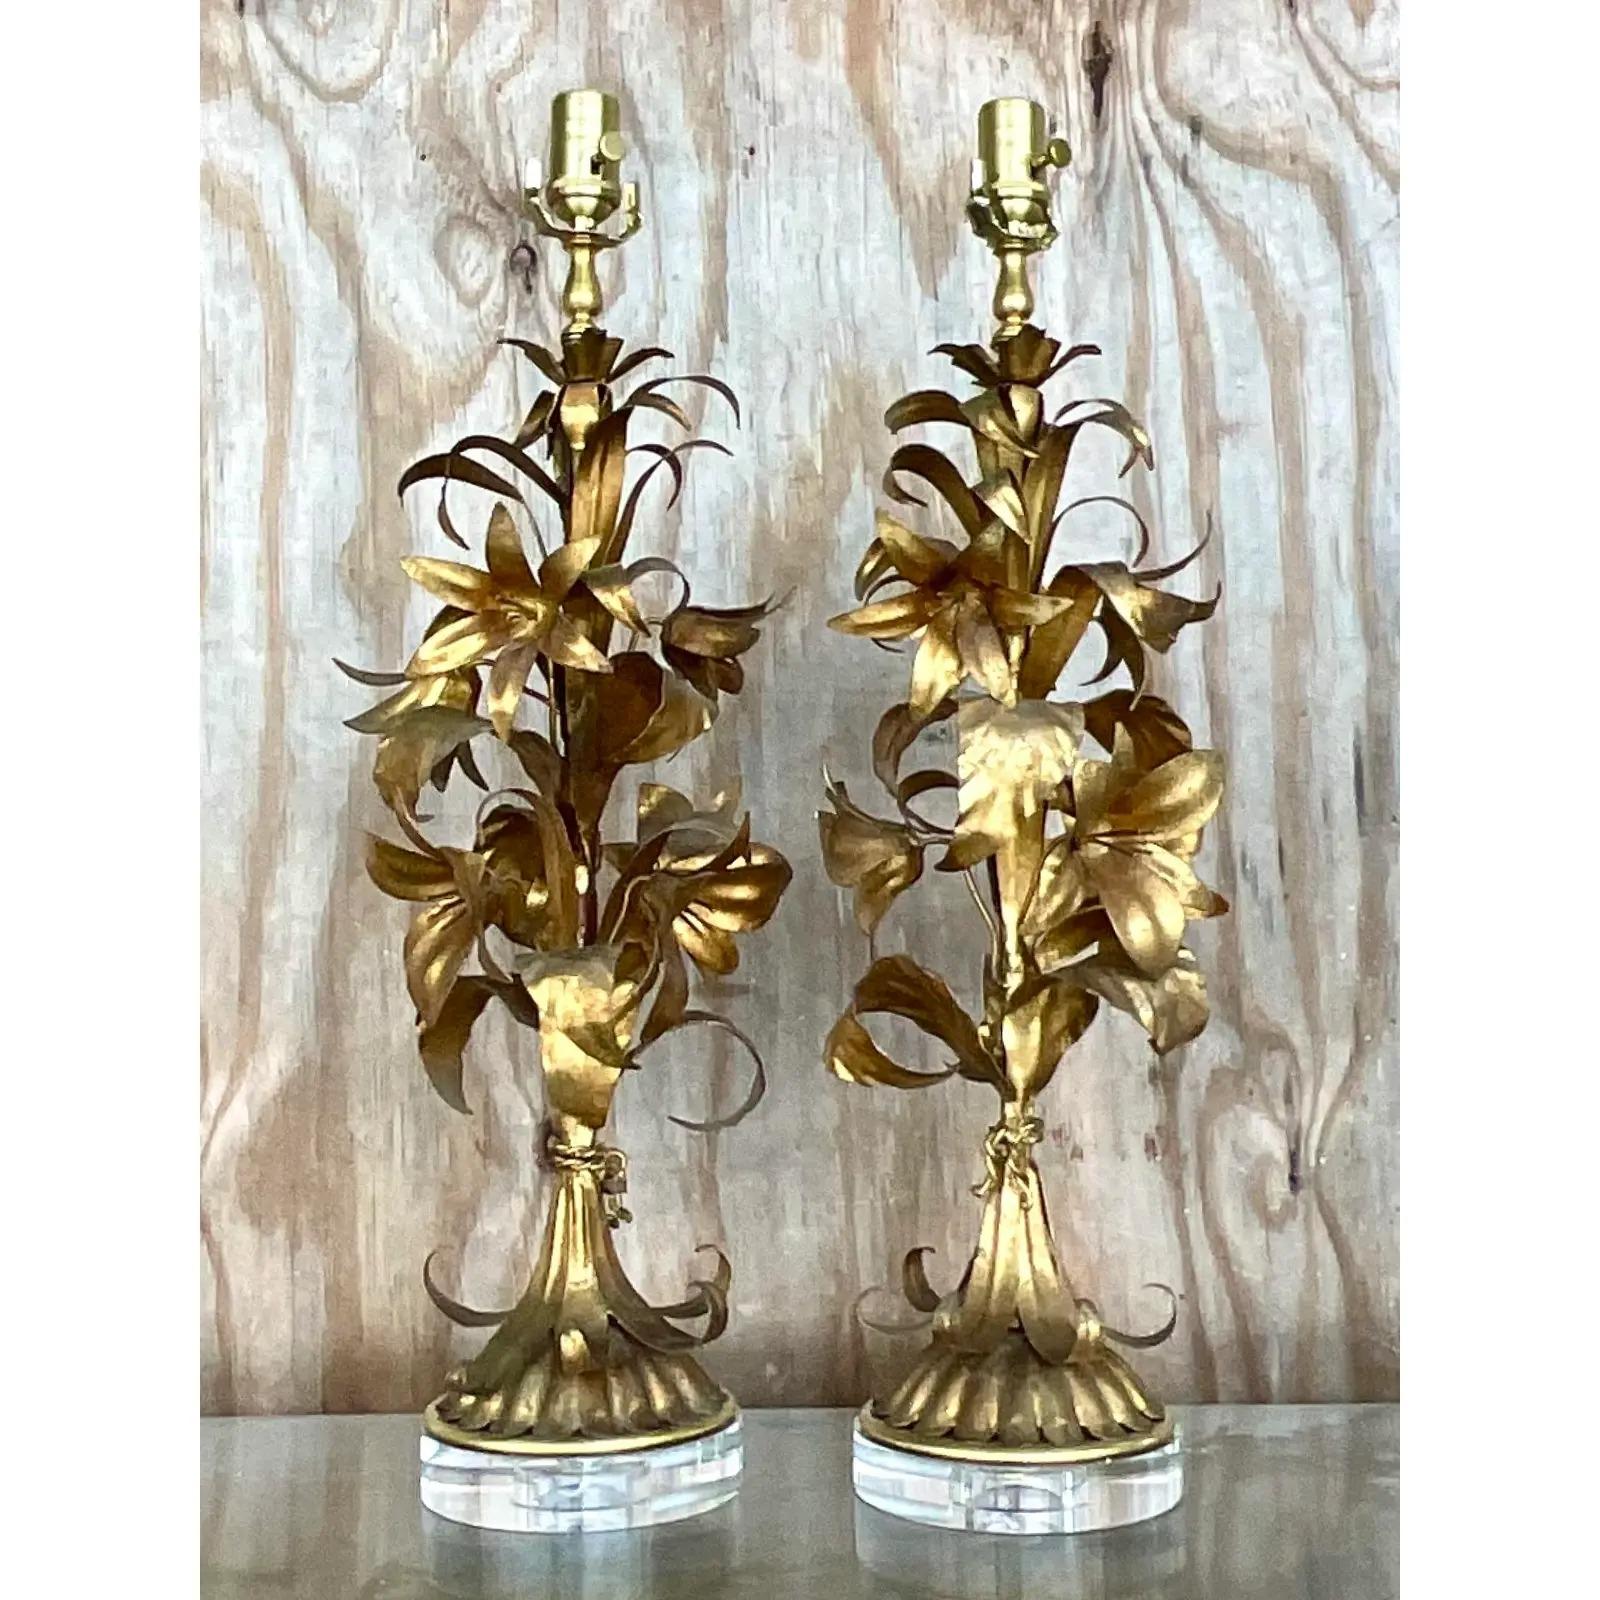 A fabulous pair of vintage Regency table lamps. A chic gilt lily design on contemporary lucite plinths. A fresh interpretation of a Palm Beach classic. All new wiring and hardware. Acquired from a Palm Beach estate.